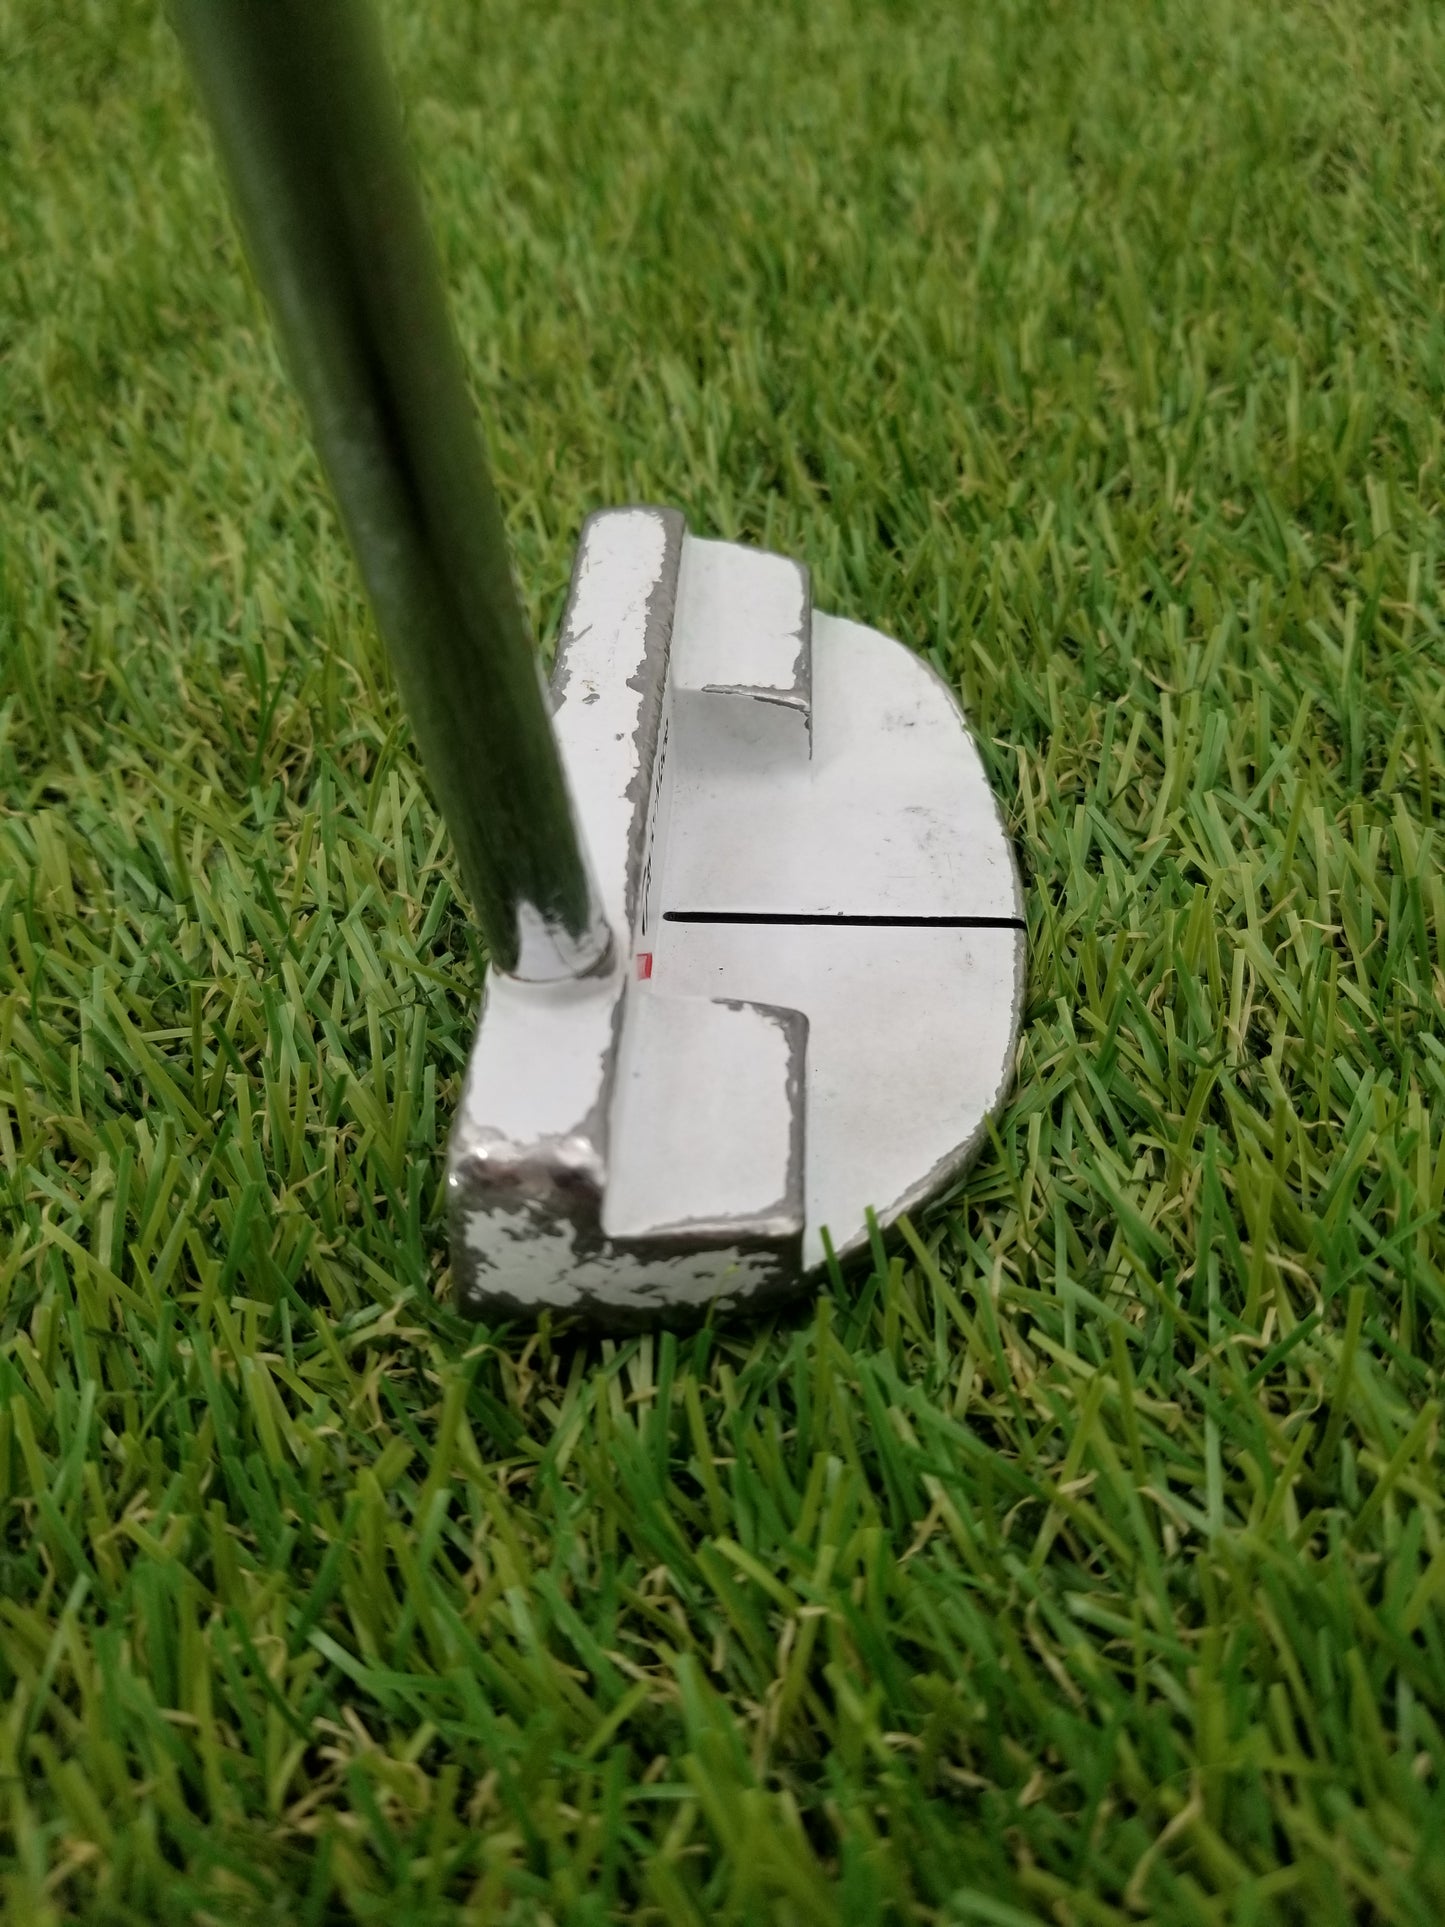 TAYLORMADE GHOST TOUR FO 72 PUTTER 34.5" POOR